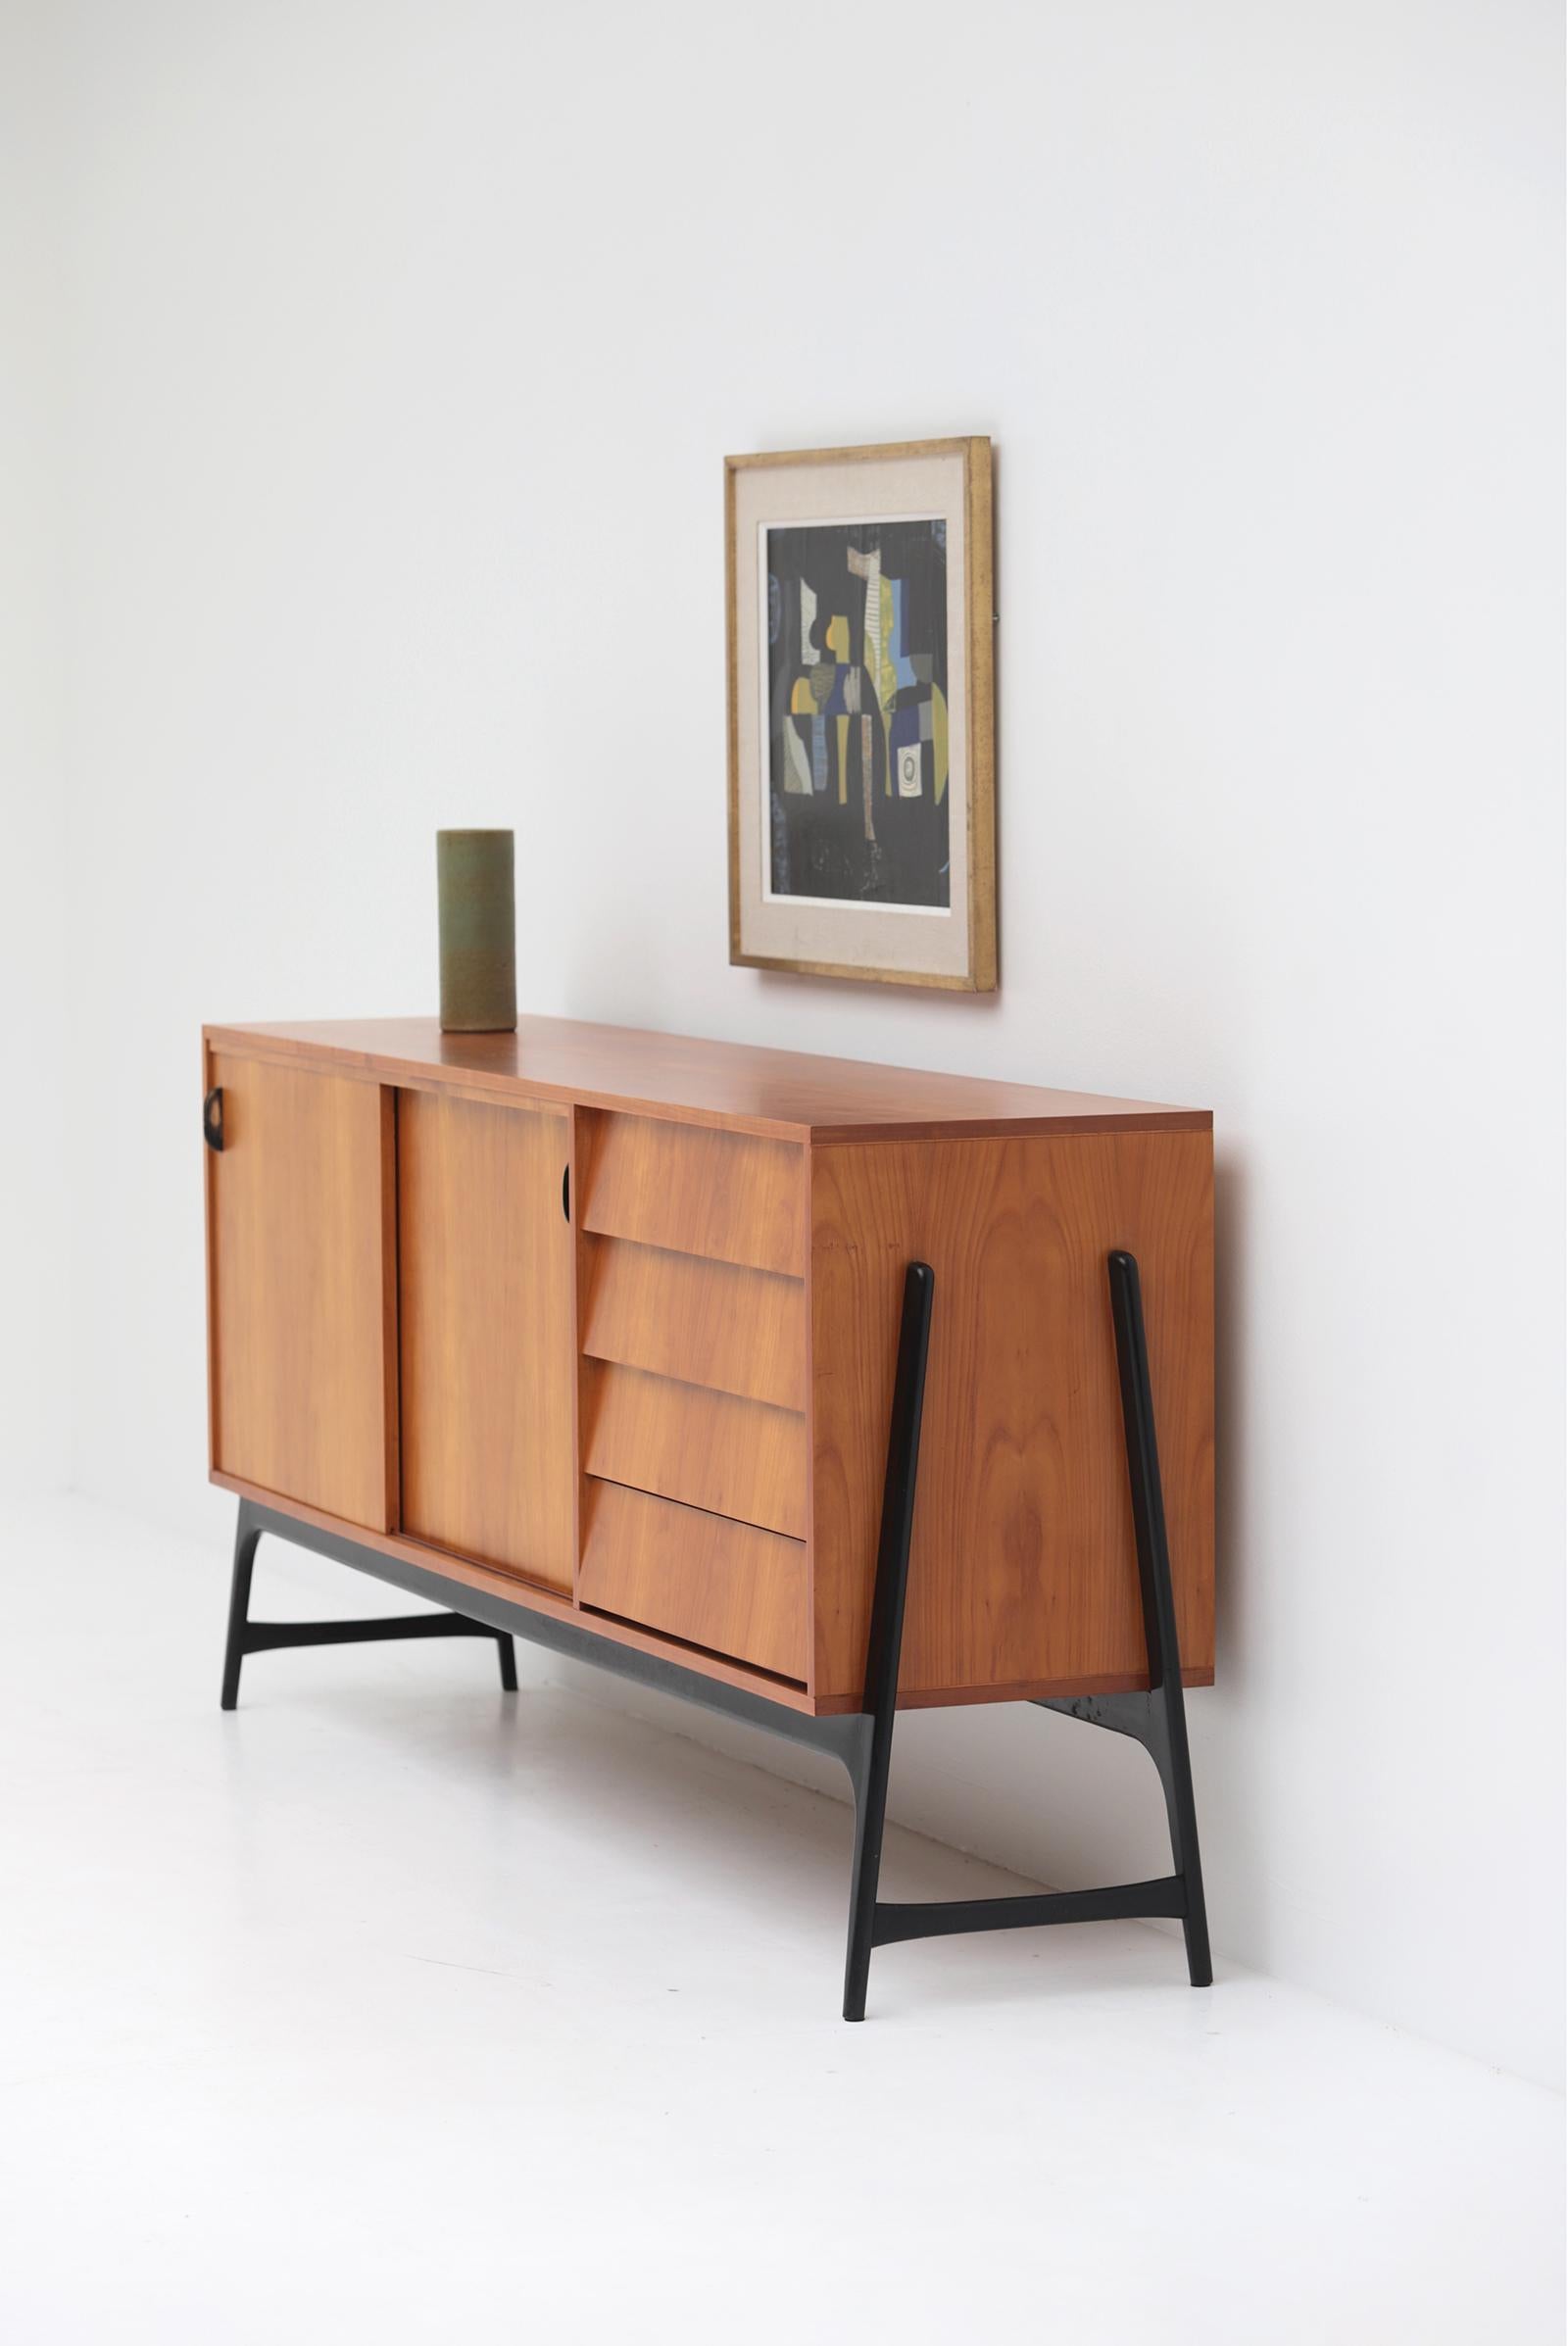 Unique midcentury sideboard by Alfred Hendrickx designed in 1958 for Belform 2